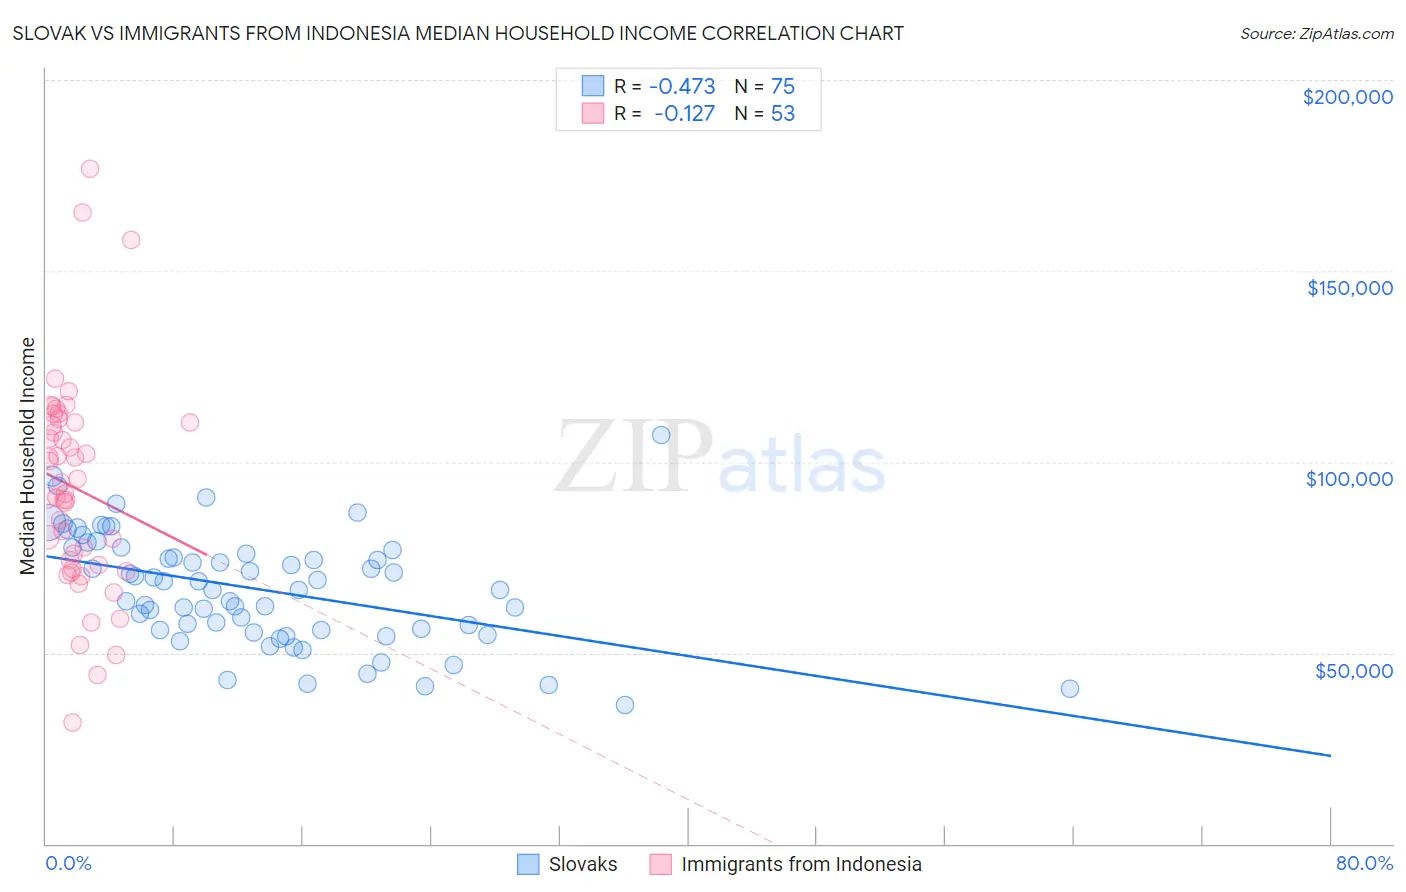 Slovak vs Immigrants from Indonesia Median Household Income